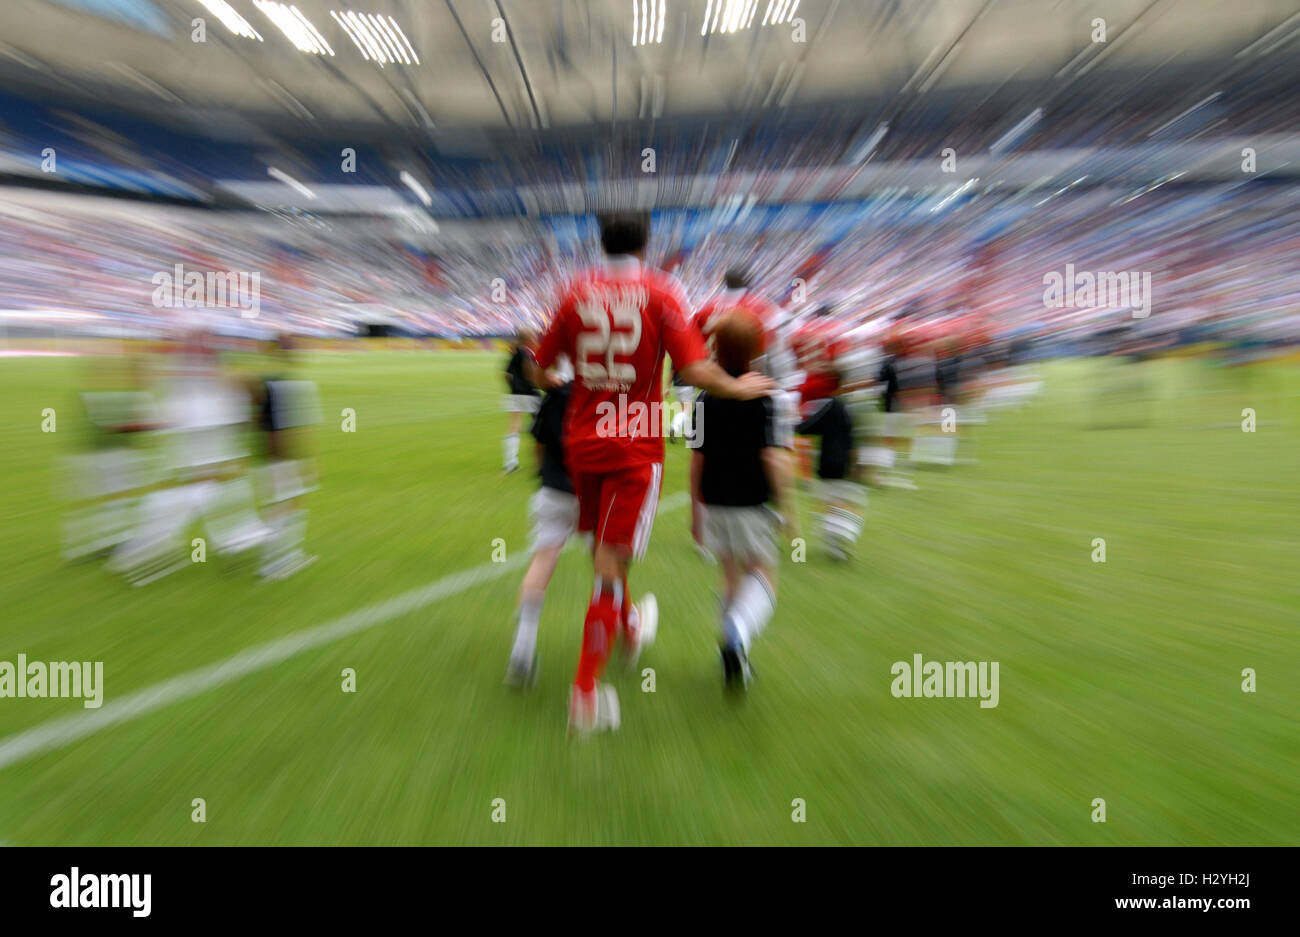 Teams walking on to the pitch, Liga total Cup 2010, League total Cup, match for third place between Hamburger SV and FC Koeln Stock Photo